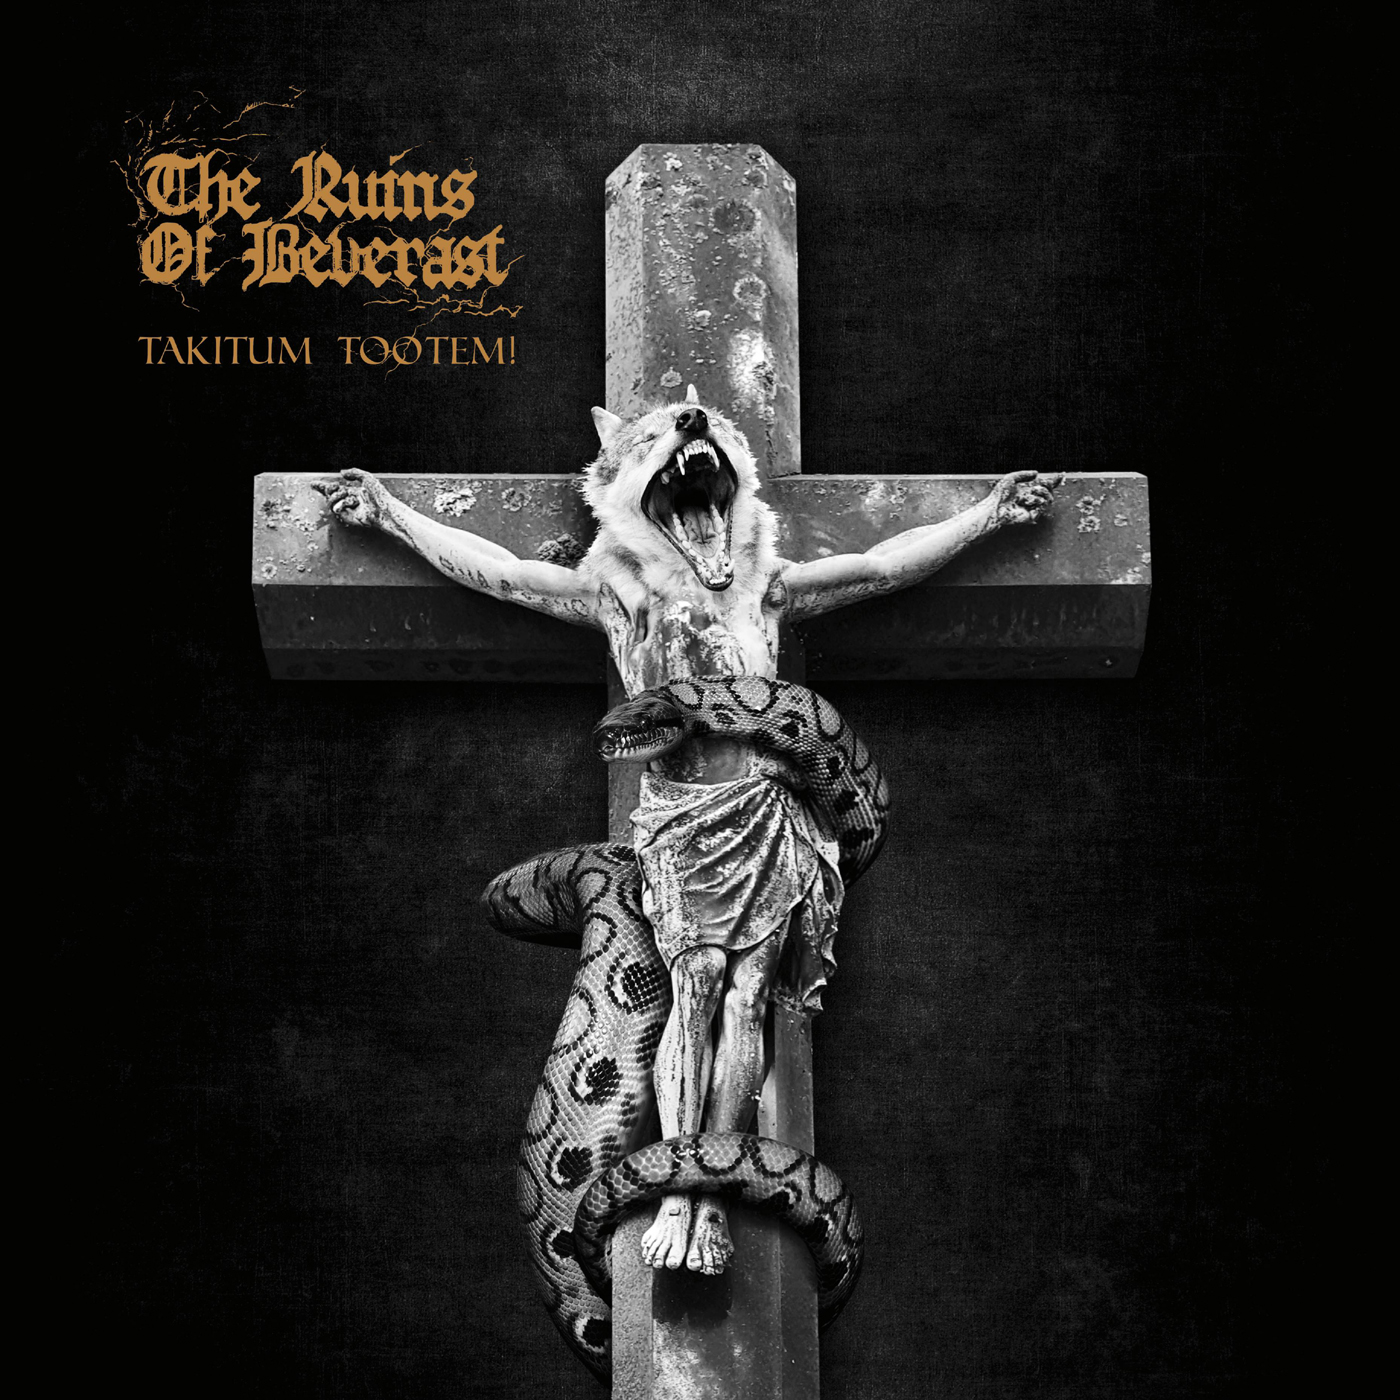 The Ruins Of Beverast – Takitum Tootem!